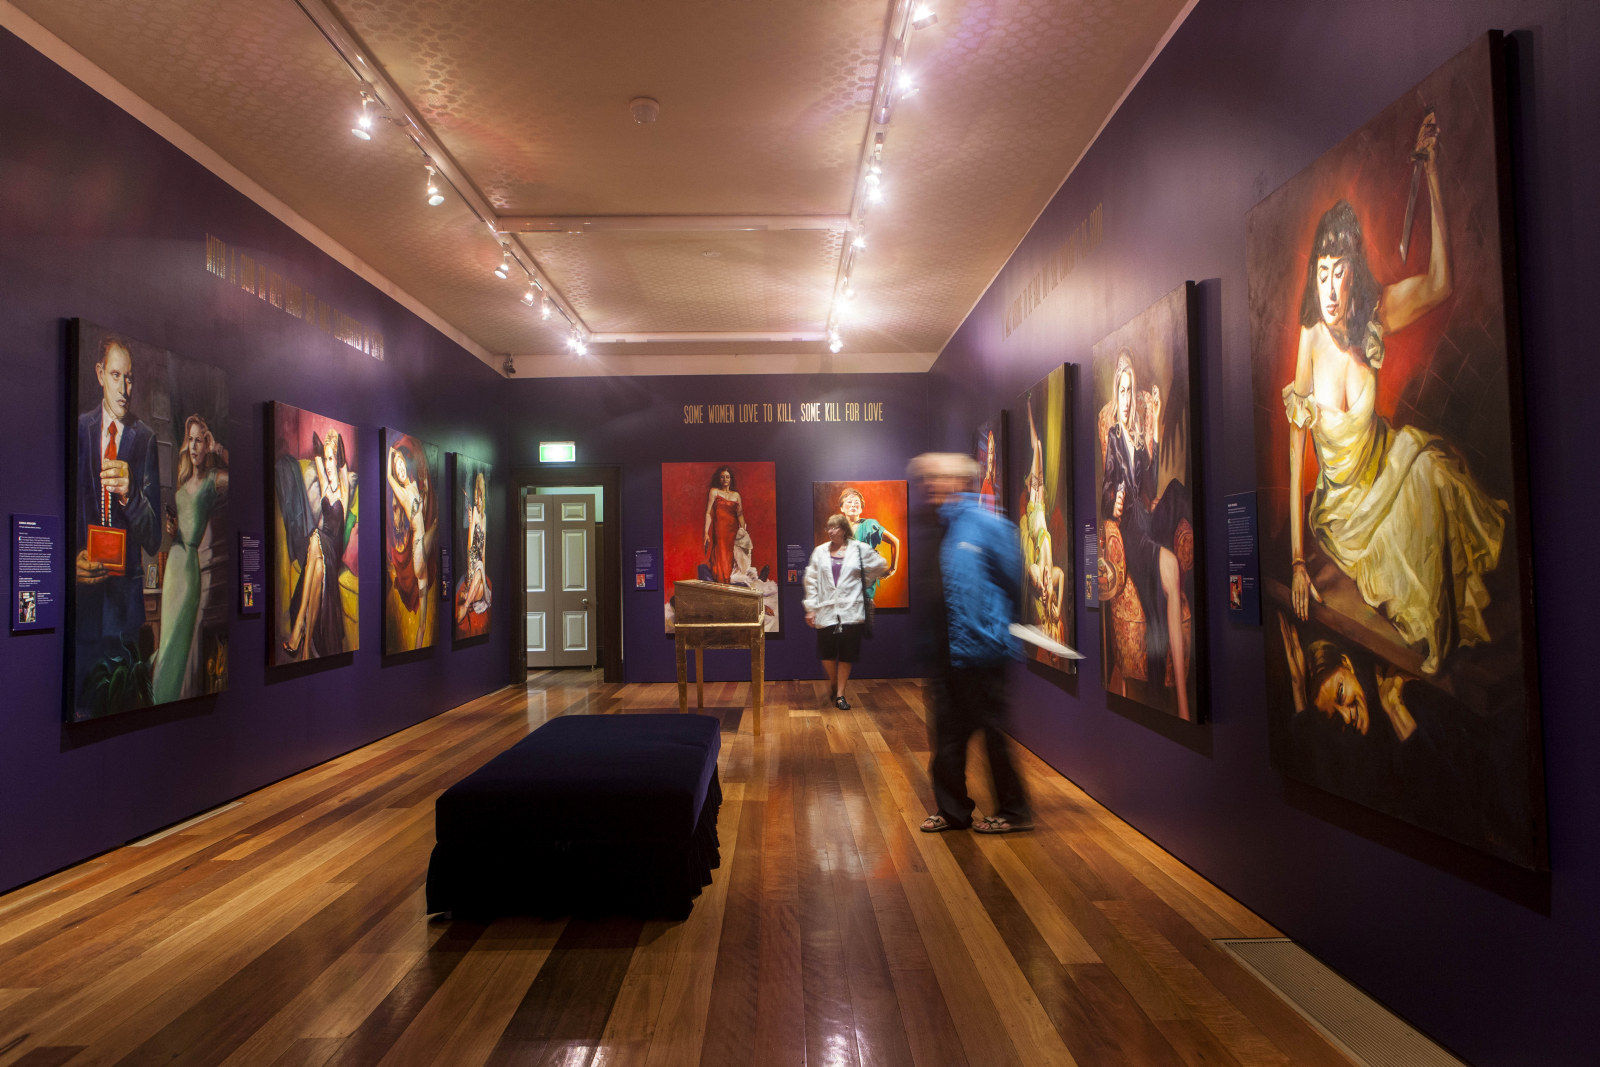 Interior view of exhibition space showing purple walls with a range of paintings hung on them.